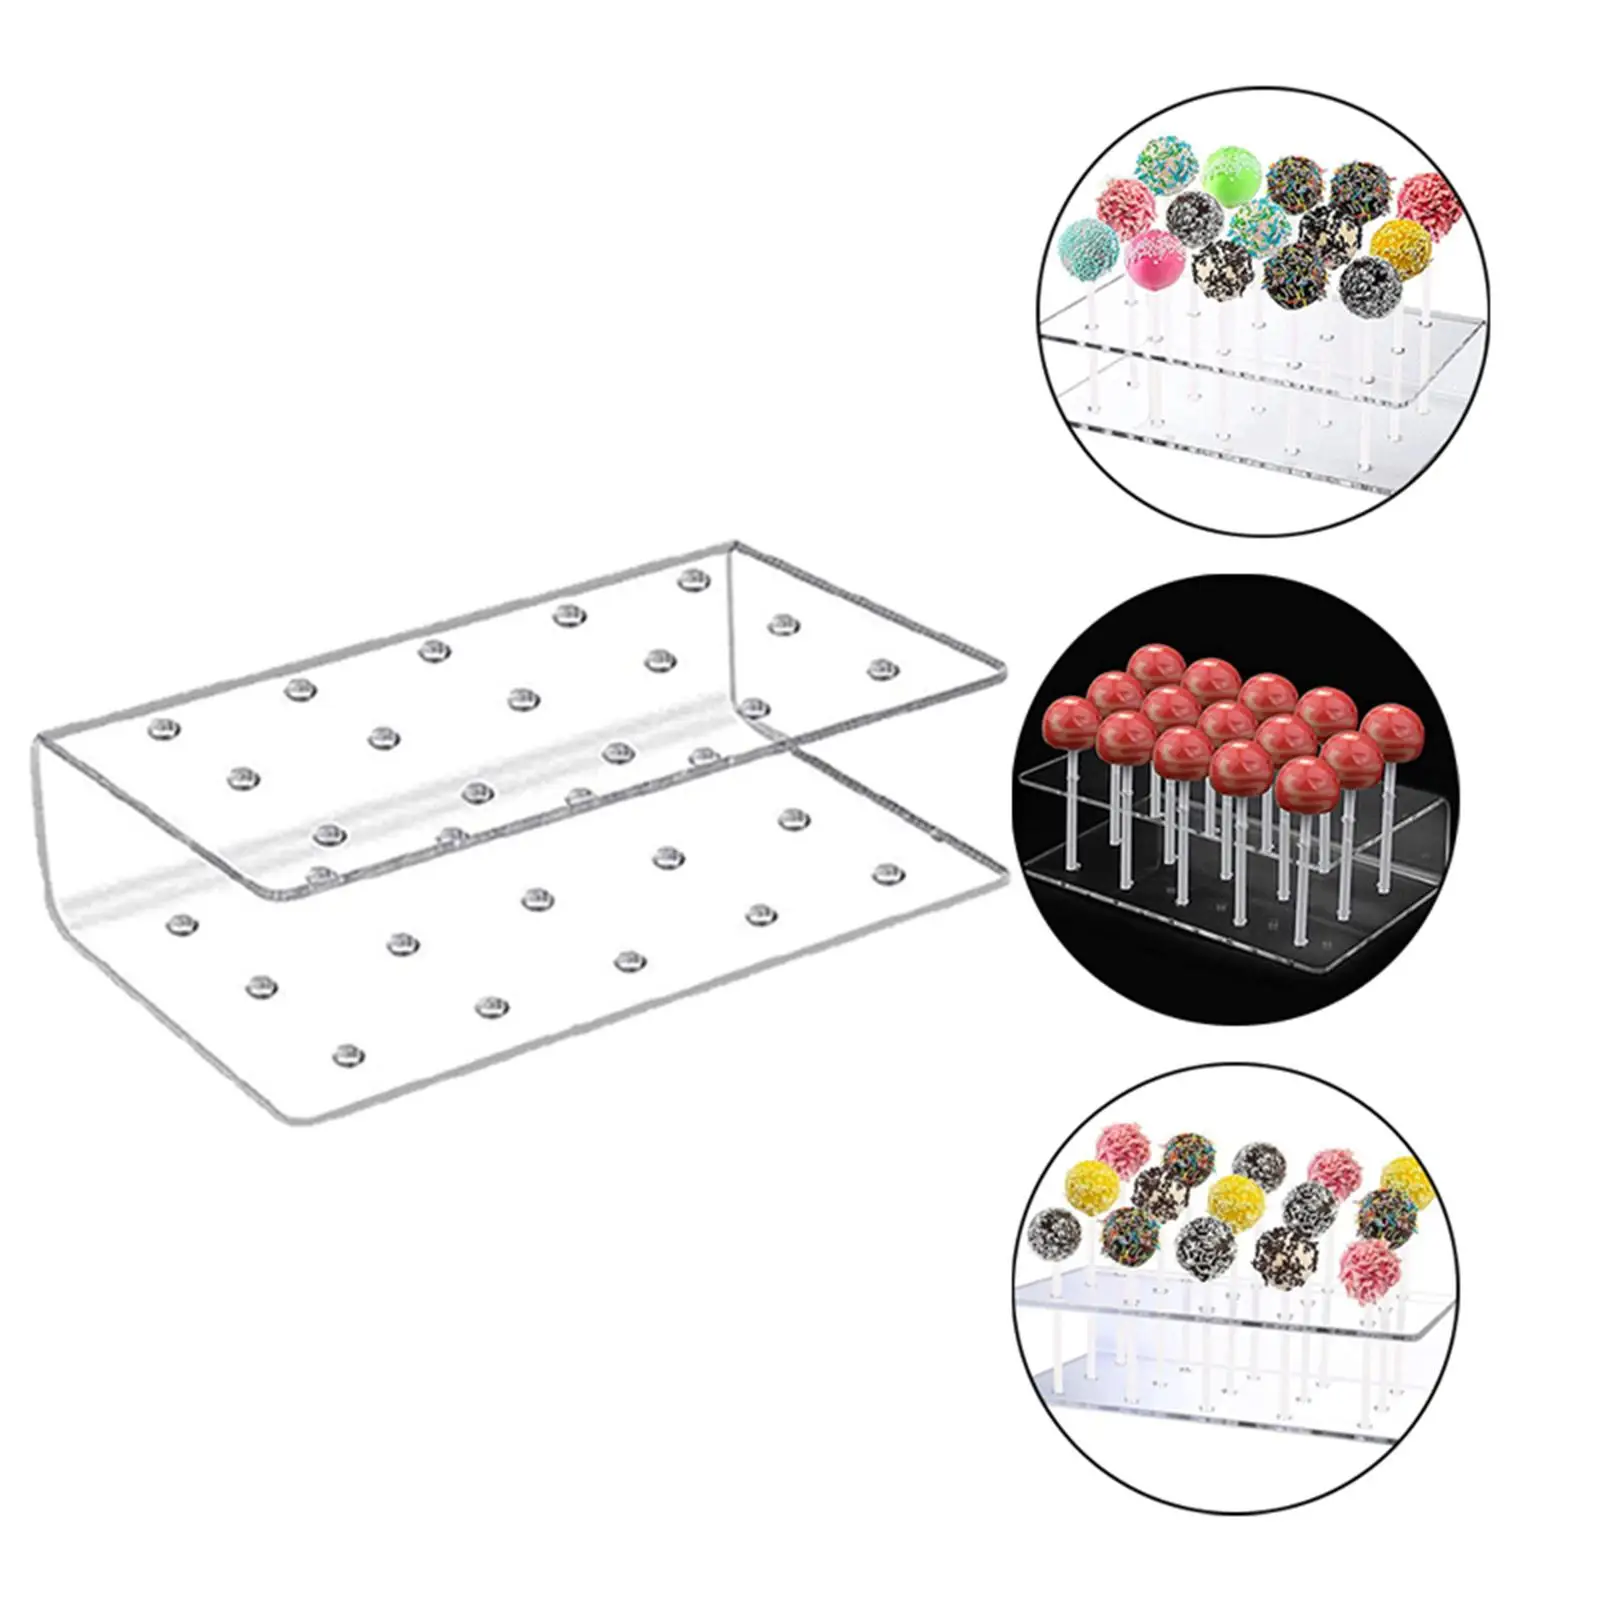 15 Holes Acrylic Lollipop Display Stand Acrylic Rectangle Shape Durable Display Holder Wedding Party Candy Dessert Stick Holder